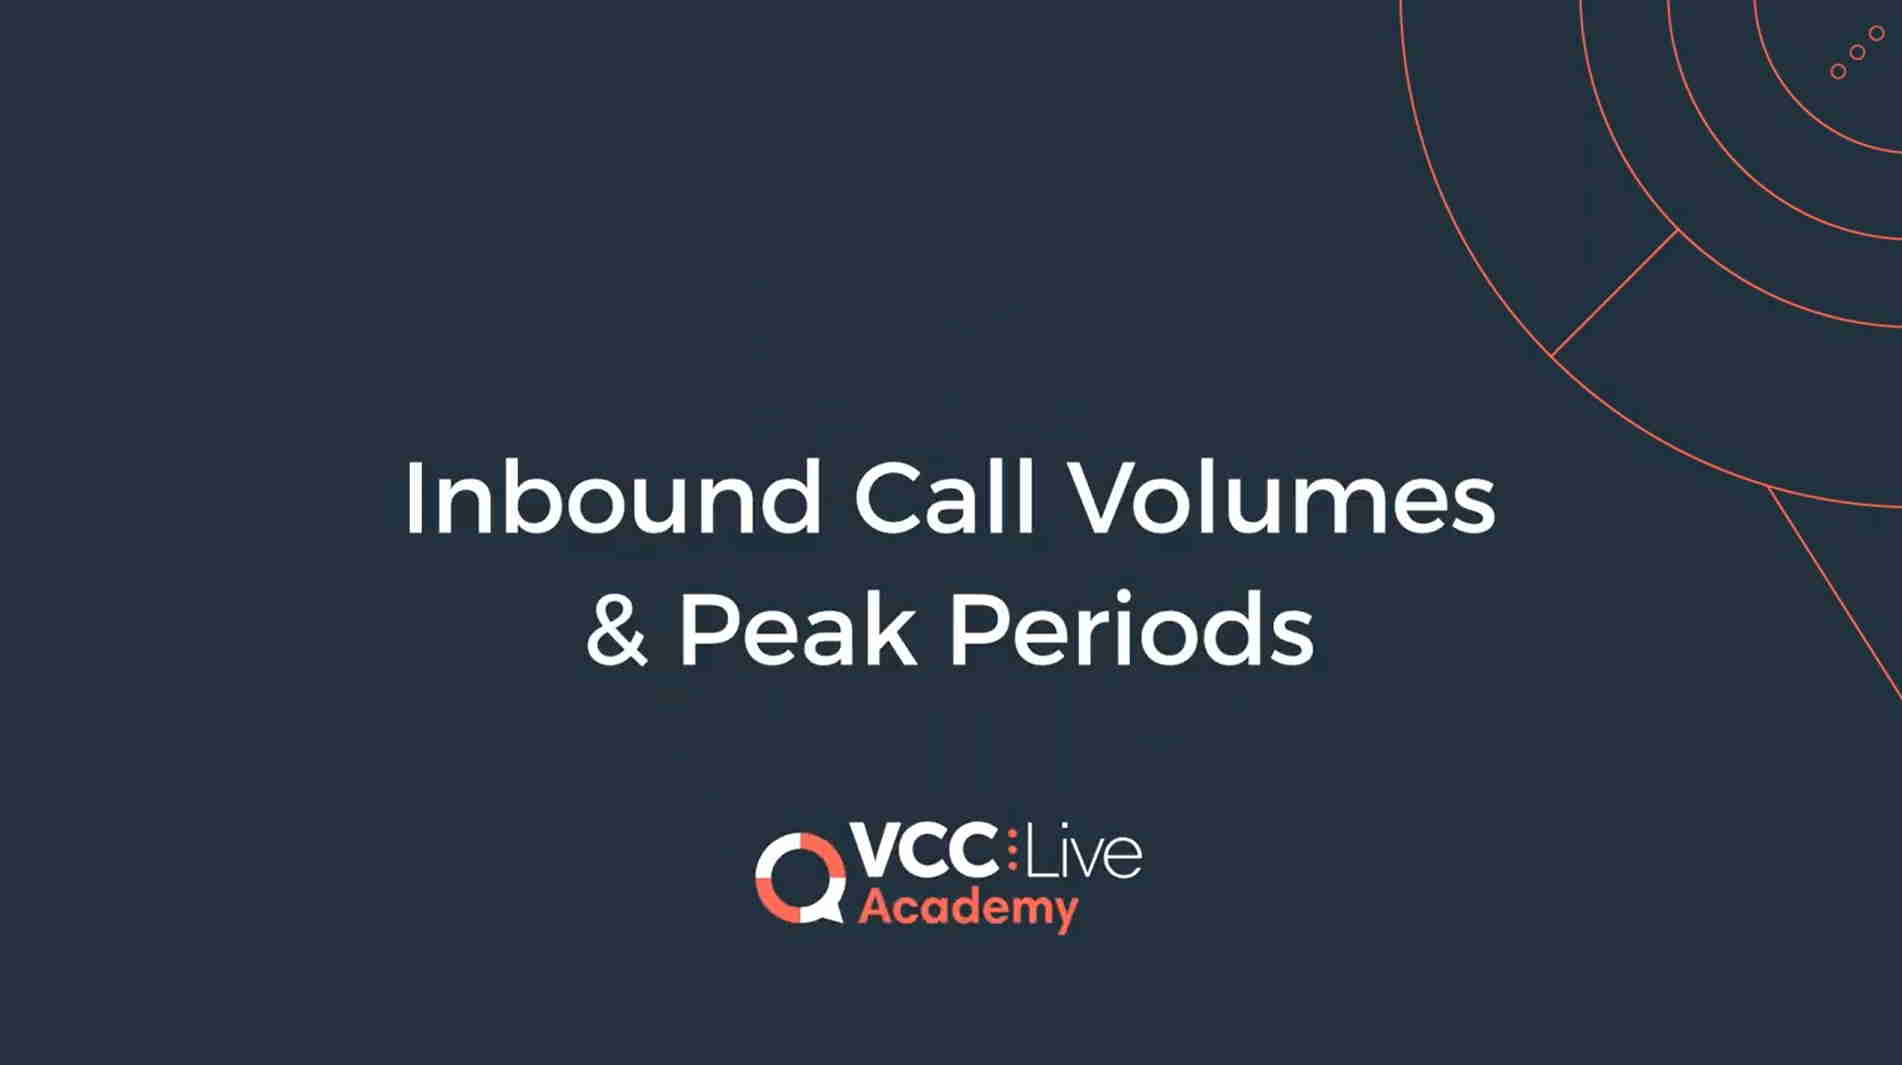 https://vcc.live/wp-content/uploads/2022/08/skill-based-routing-course-inbound-call-volume.jpg